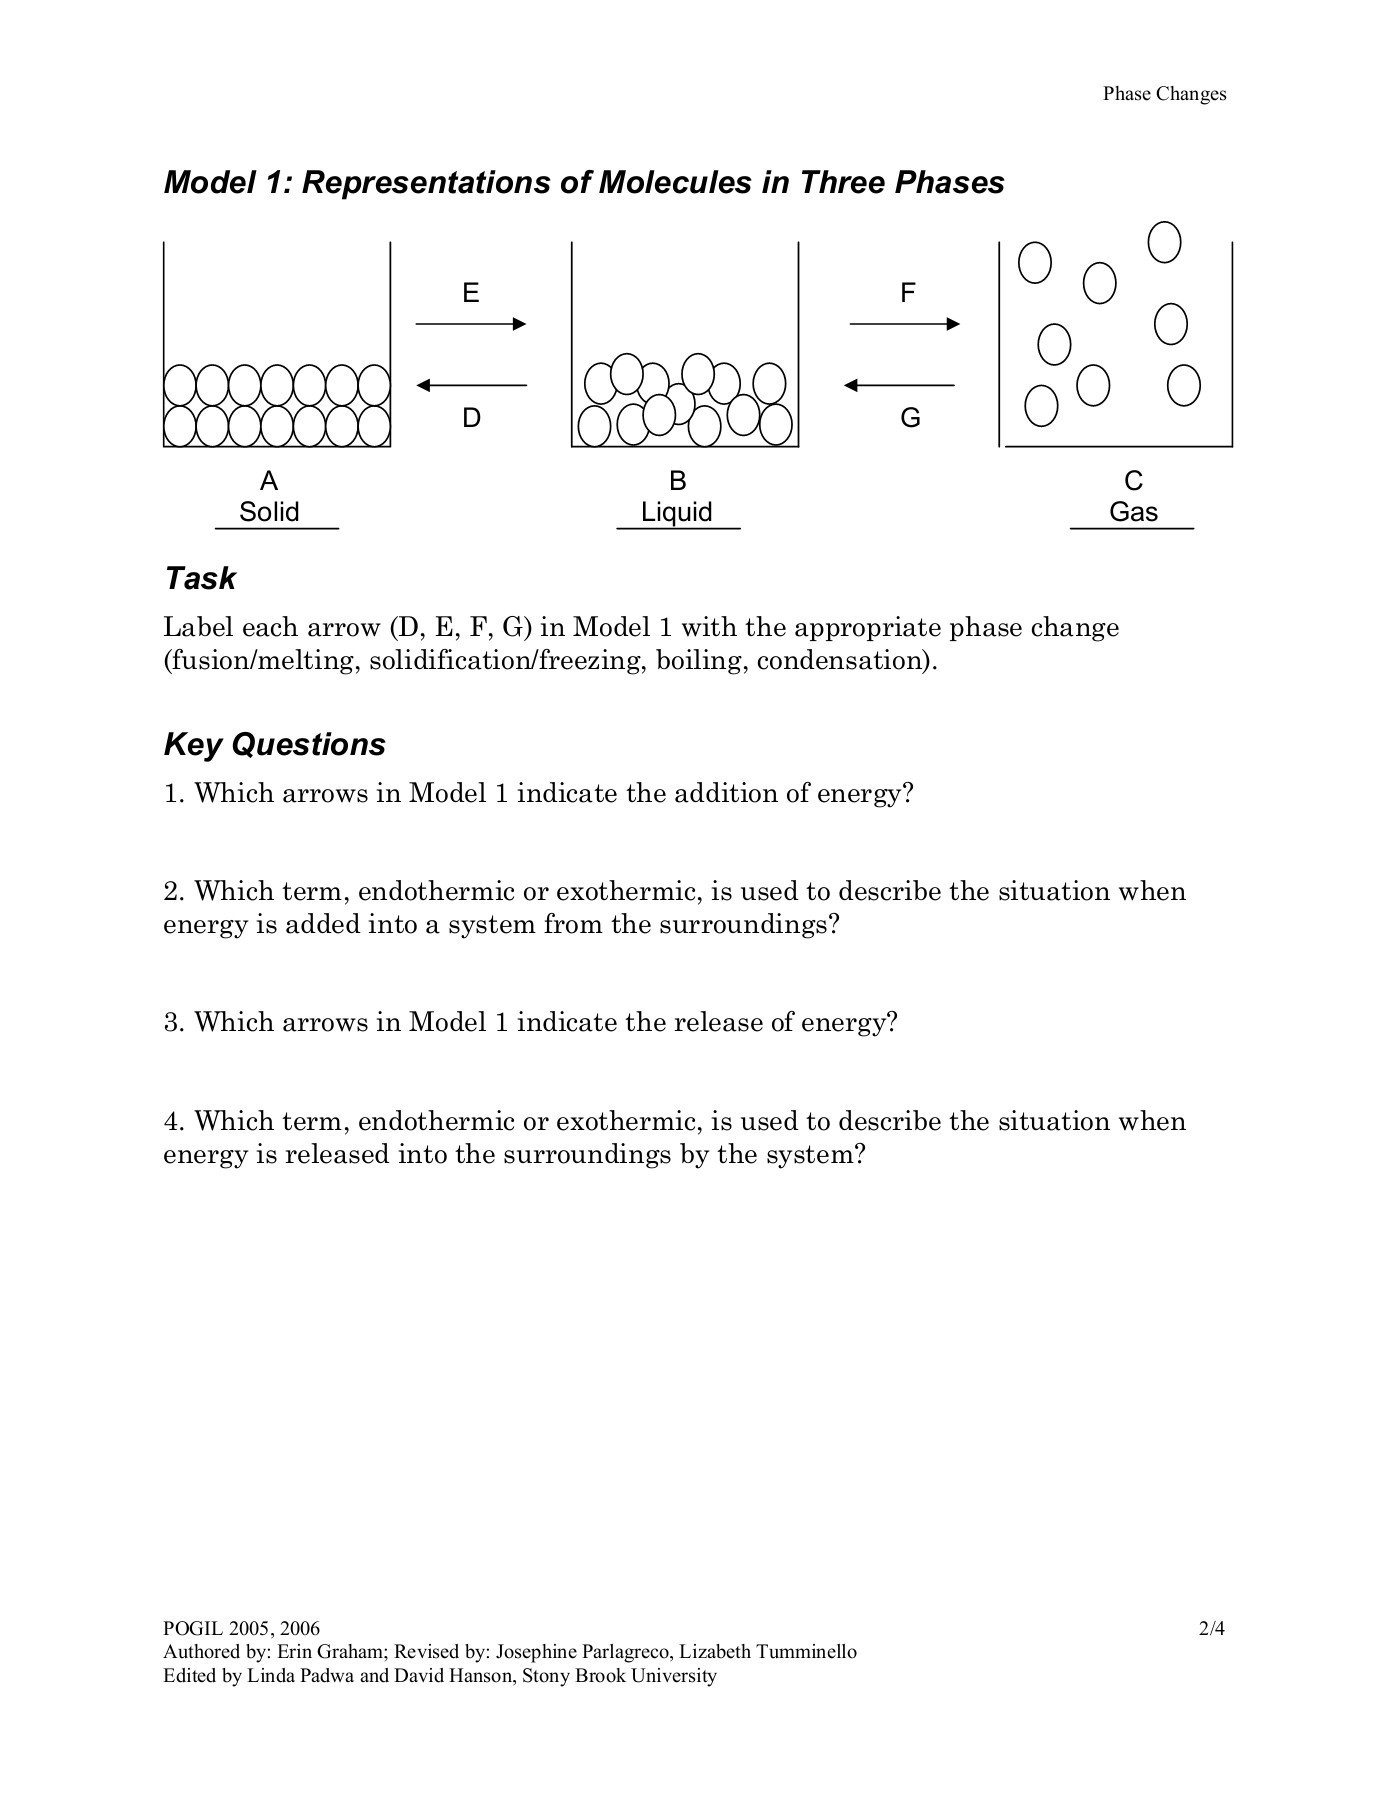 Heating and Cooling Curves Worksheet Phase Changes Pogil Pages 1 4 Text Version